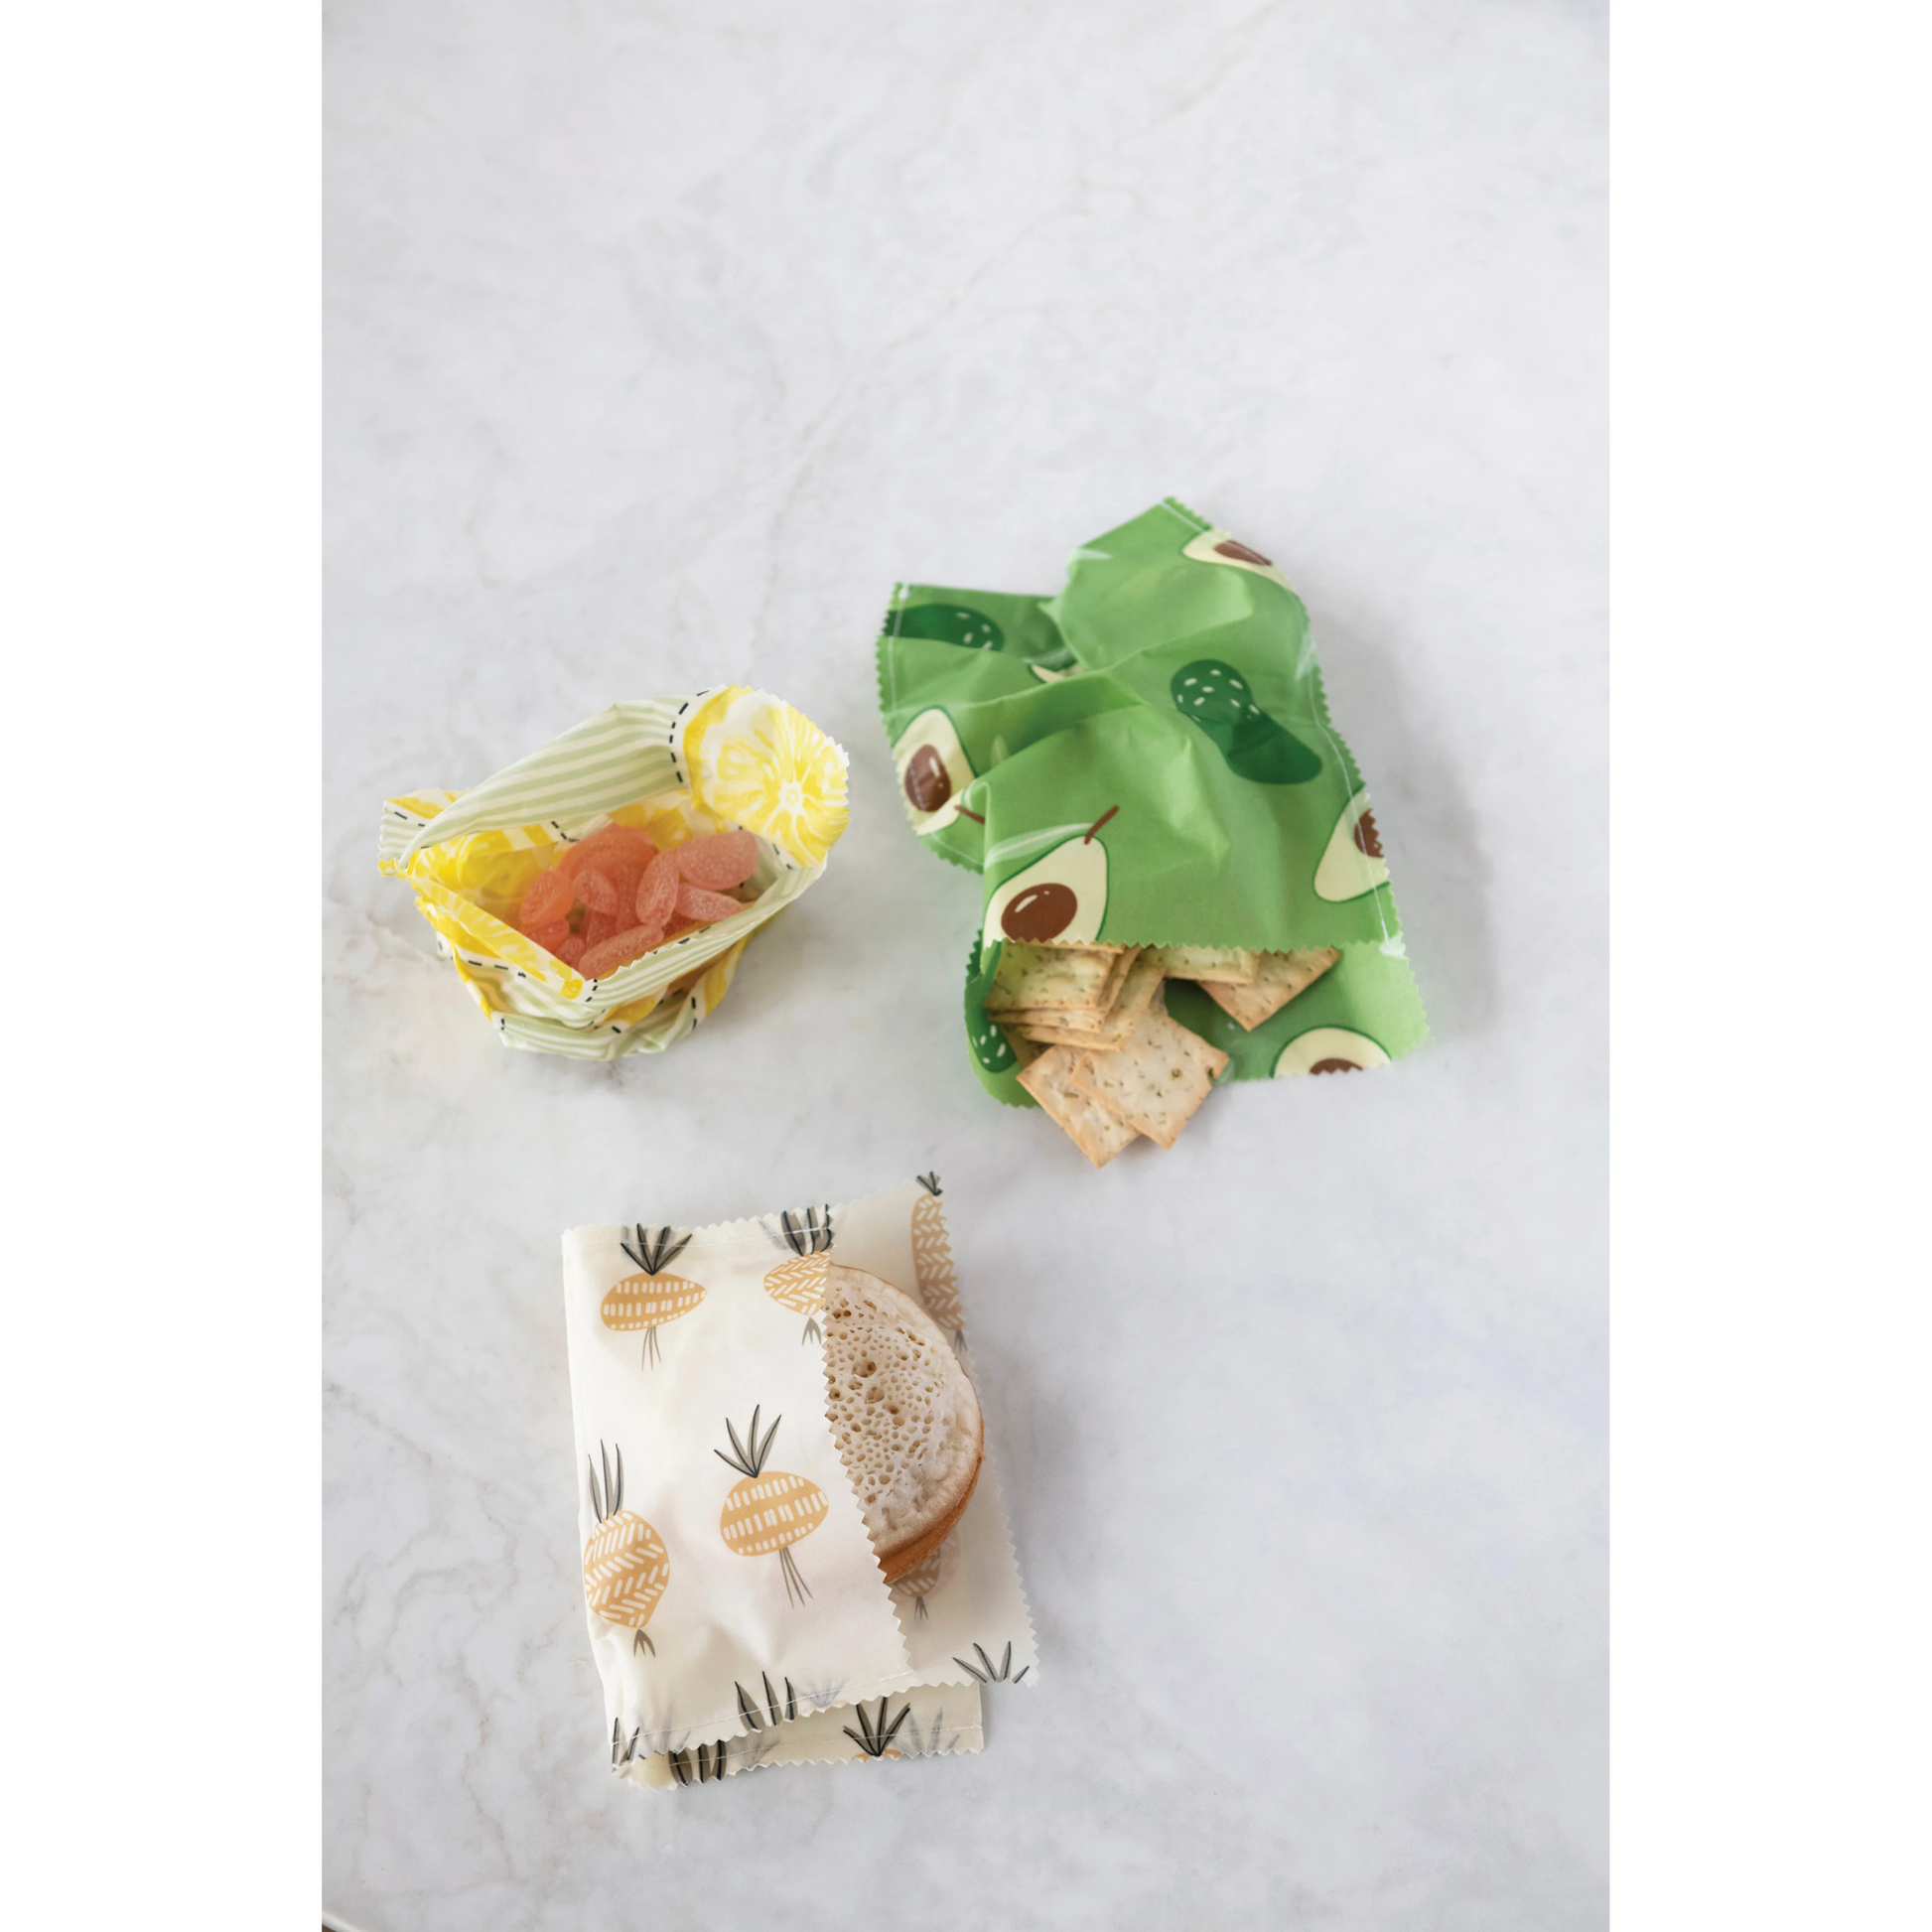 Reusable Fabric Beeswax Food Bags - 12 Styles - Mellow Monkey